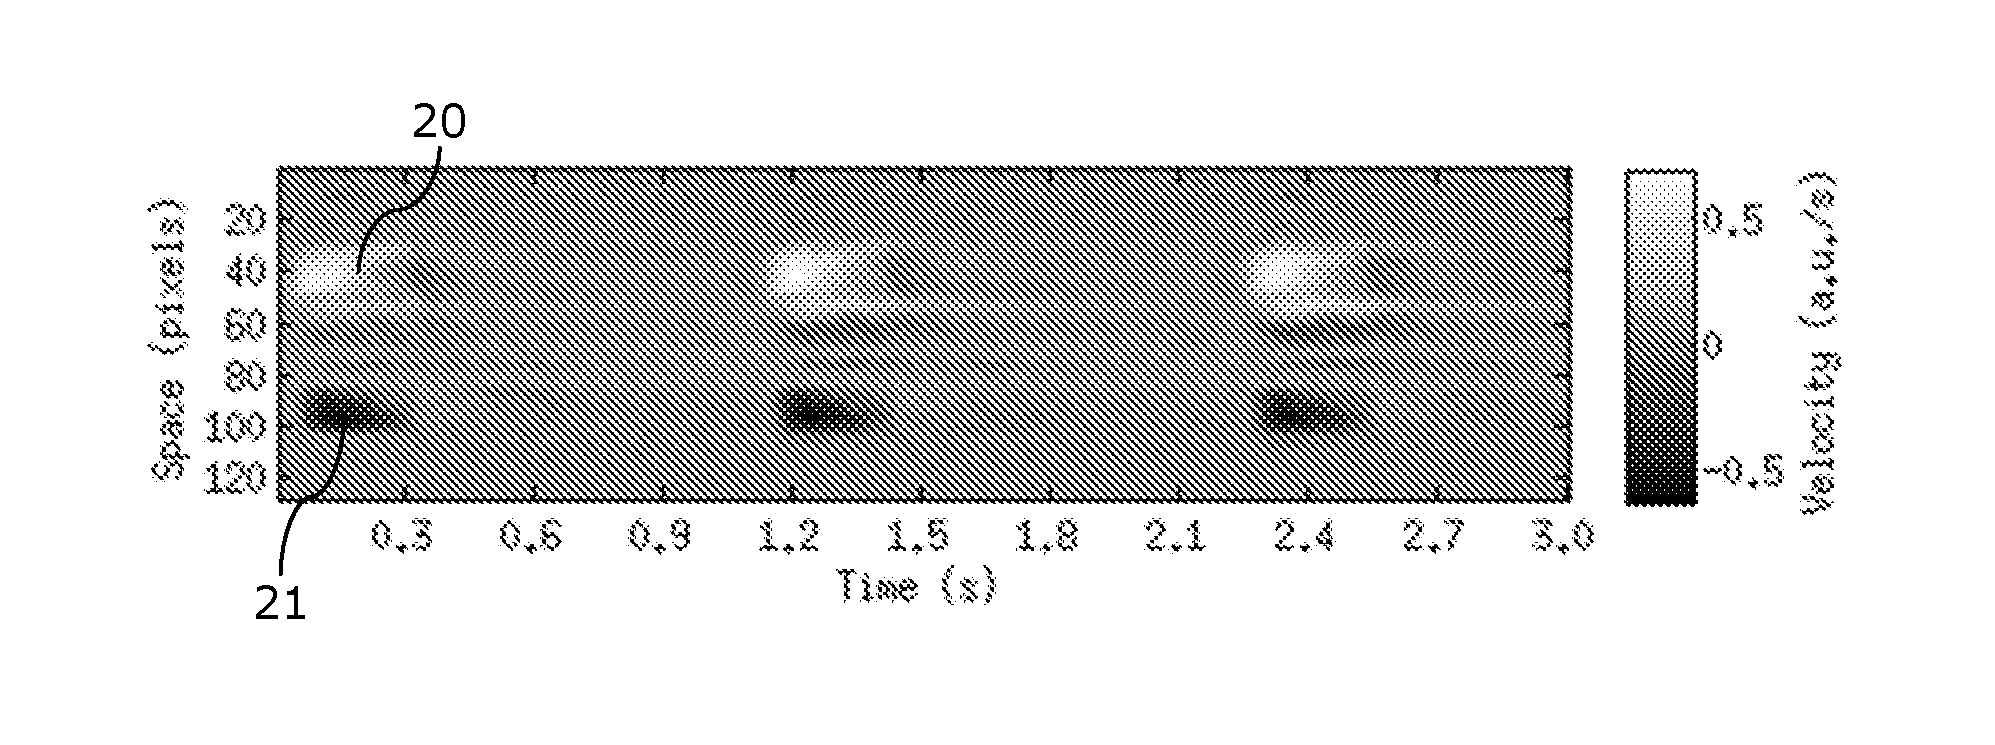 Method for determining a personalized cardiac model using a magnetic resonance imaging sequence